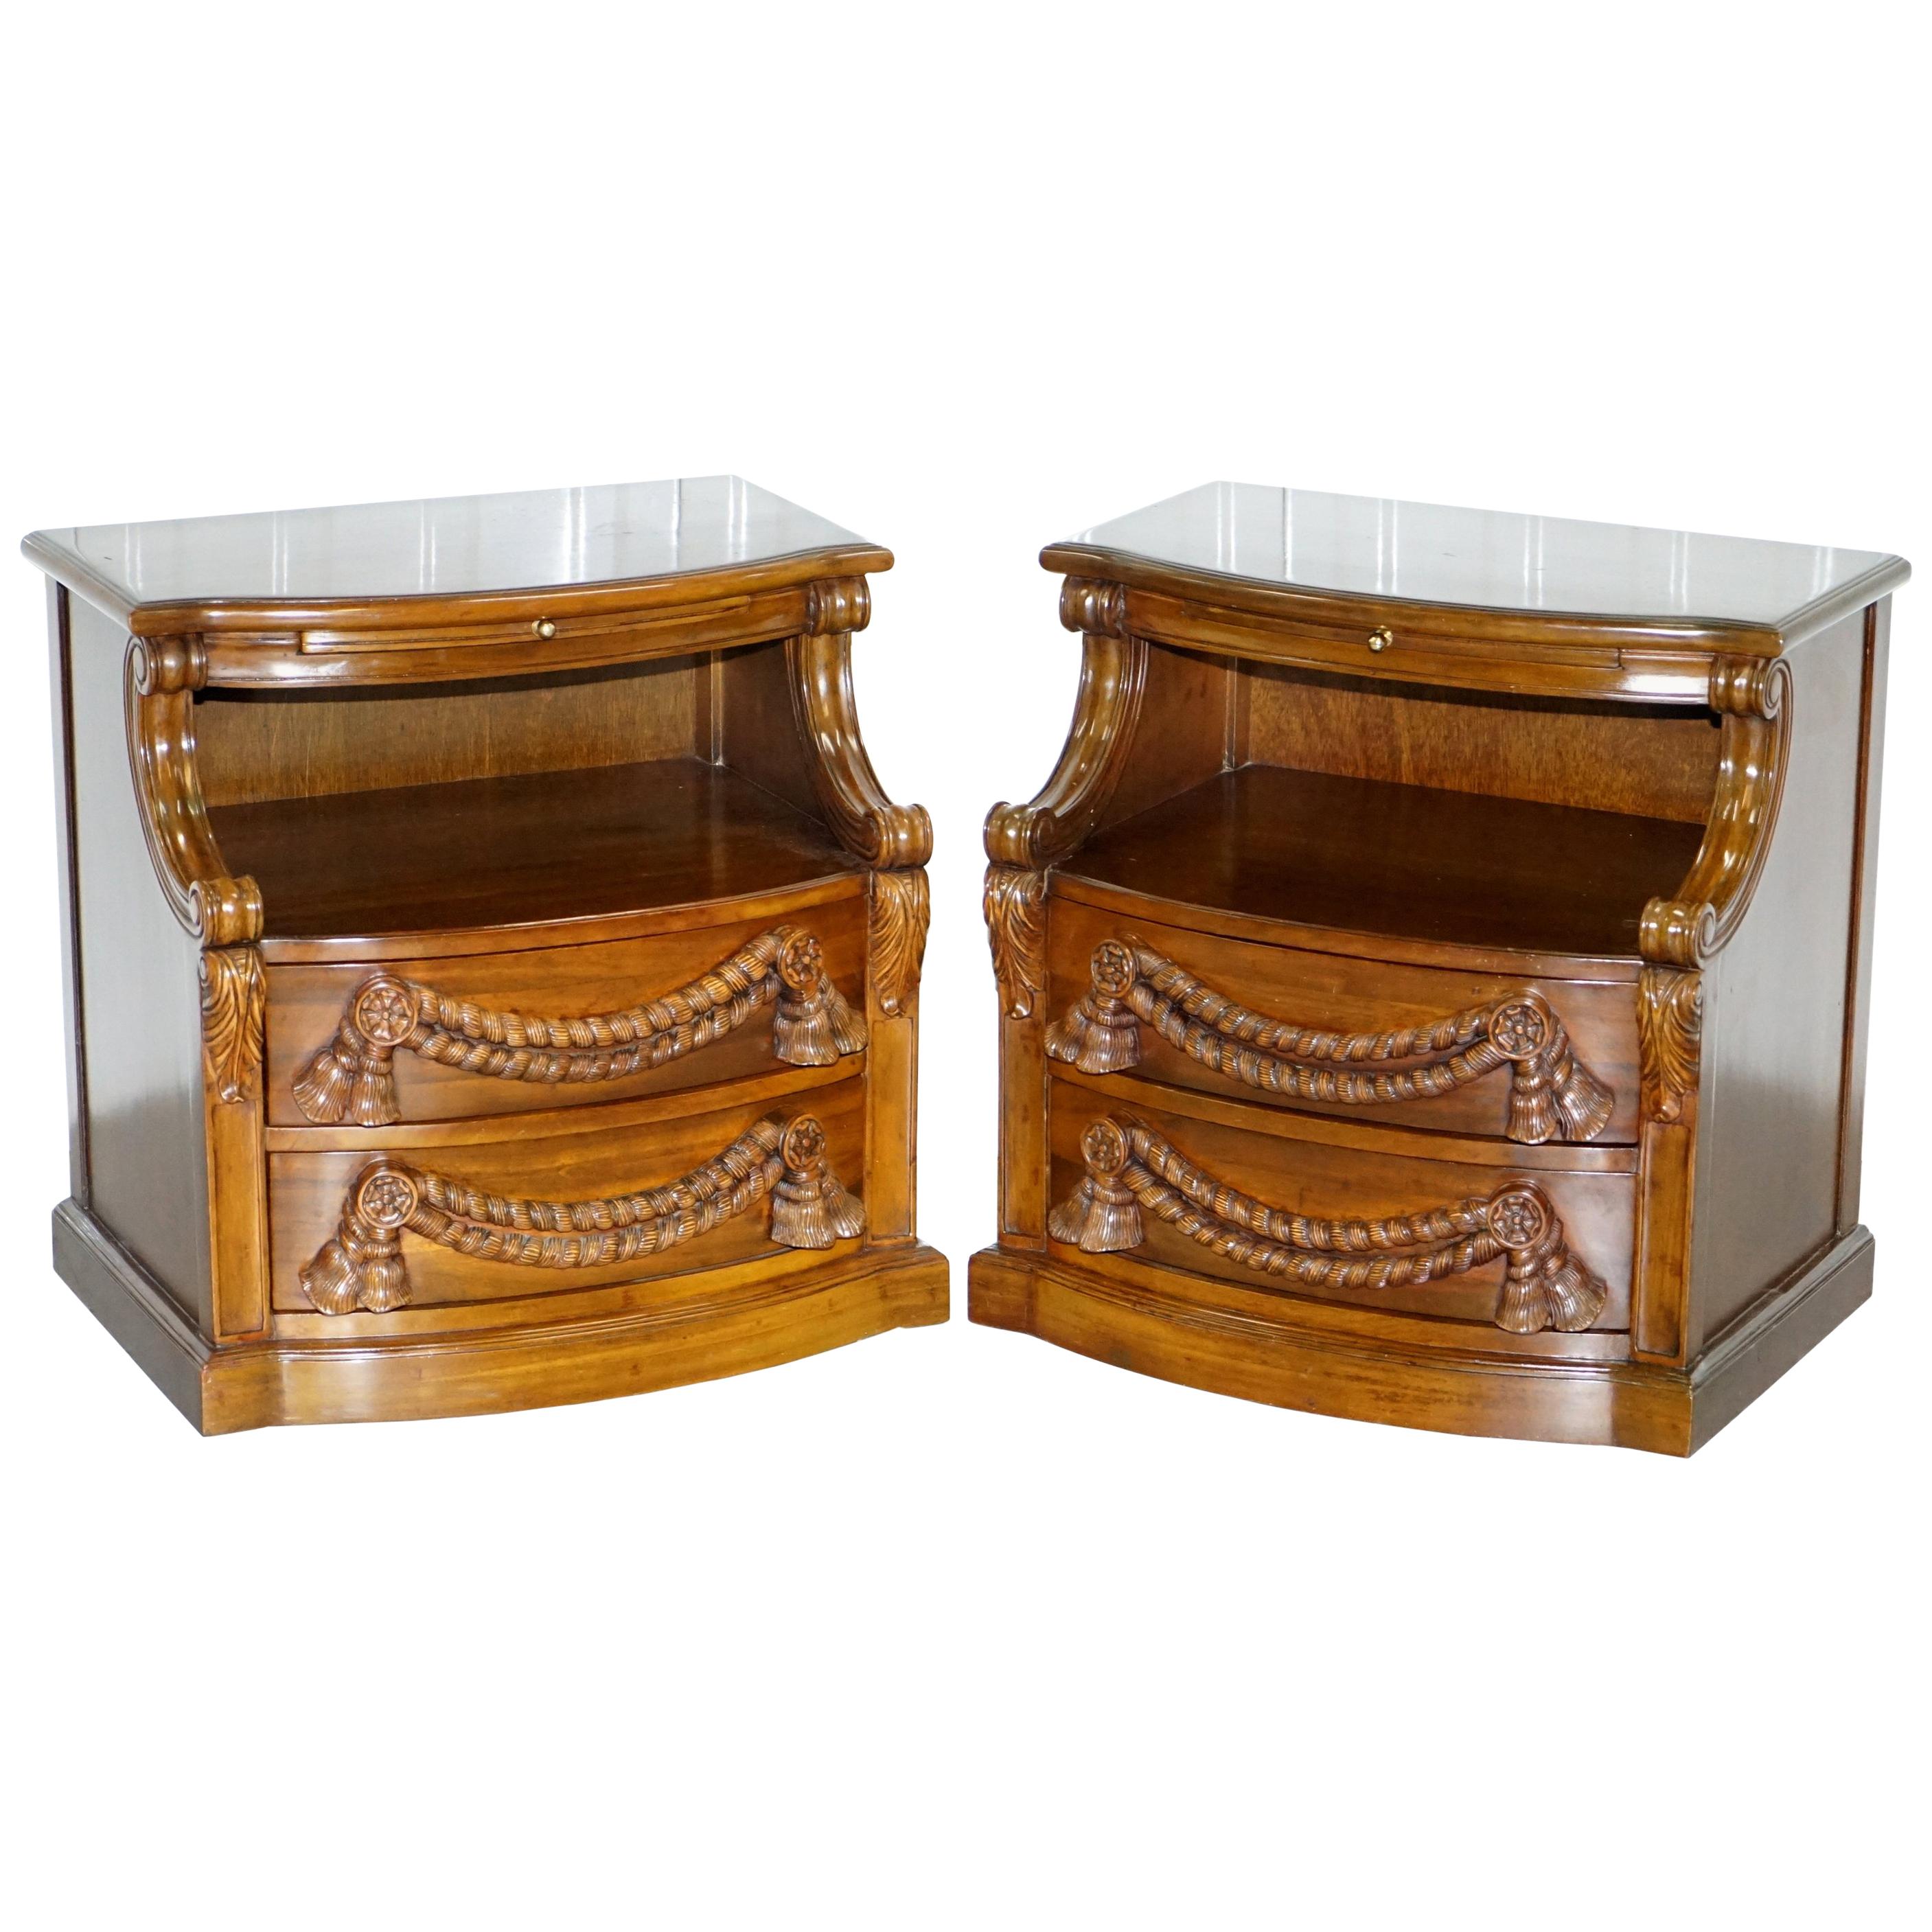 Pair of Heavy Solid Wood Side Table Bedside Table Drawers with Butlers Tray